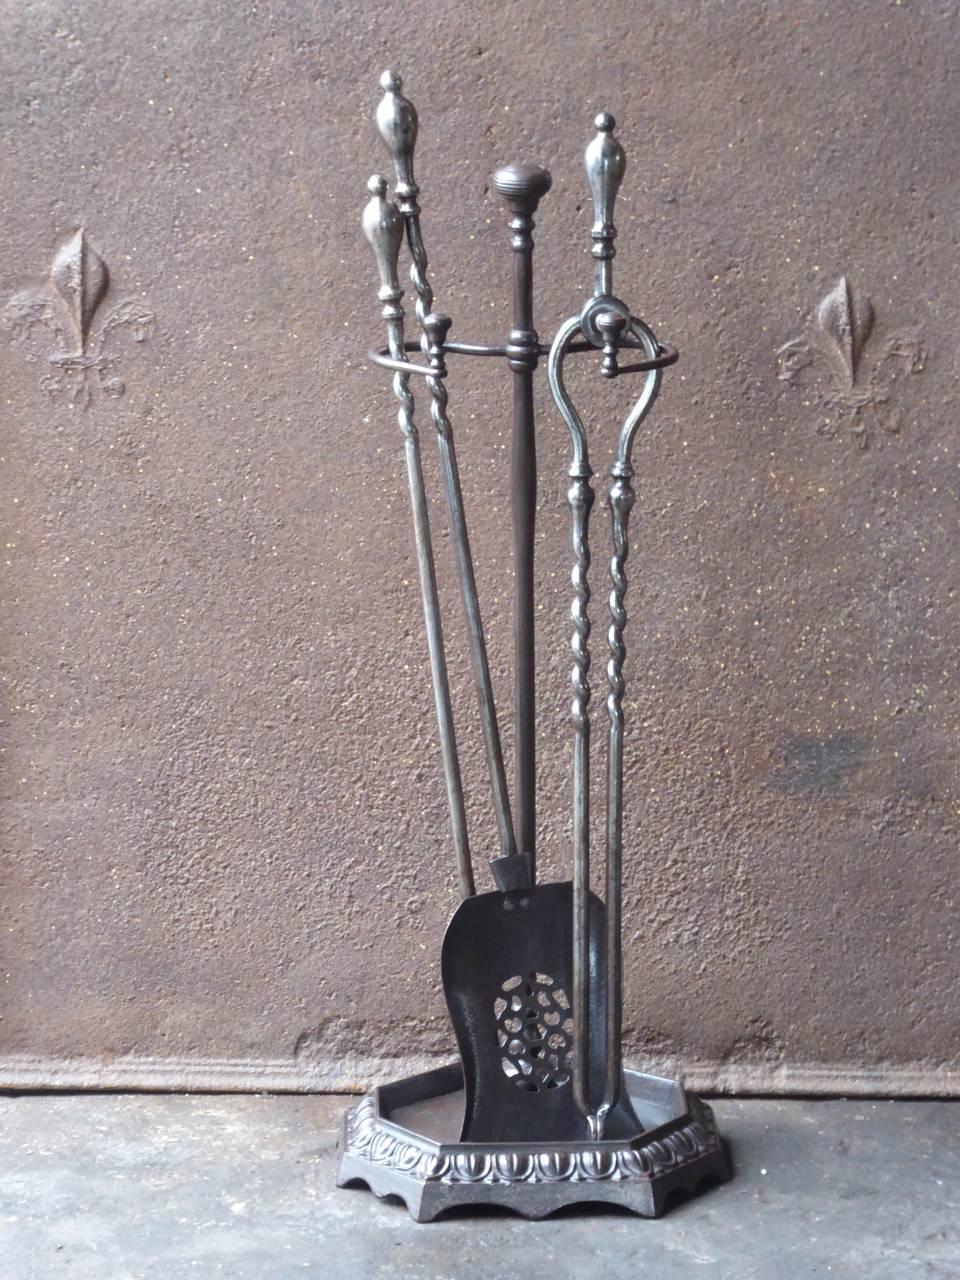 19th century English Victorian fireplace tool set, fire irons made of cast iron and wrought iron.

We have a unique and specialized collection of antique and used fireplace accessories consisting of more than 1000 listings at 1stdibs. Amongst